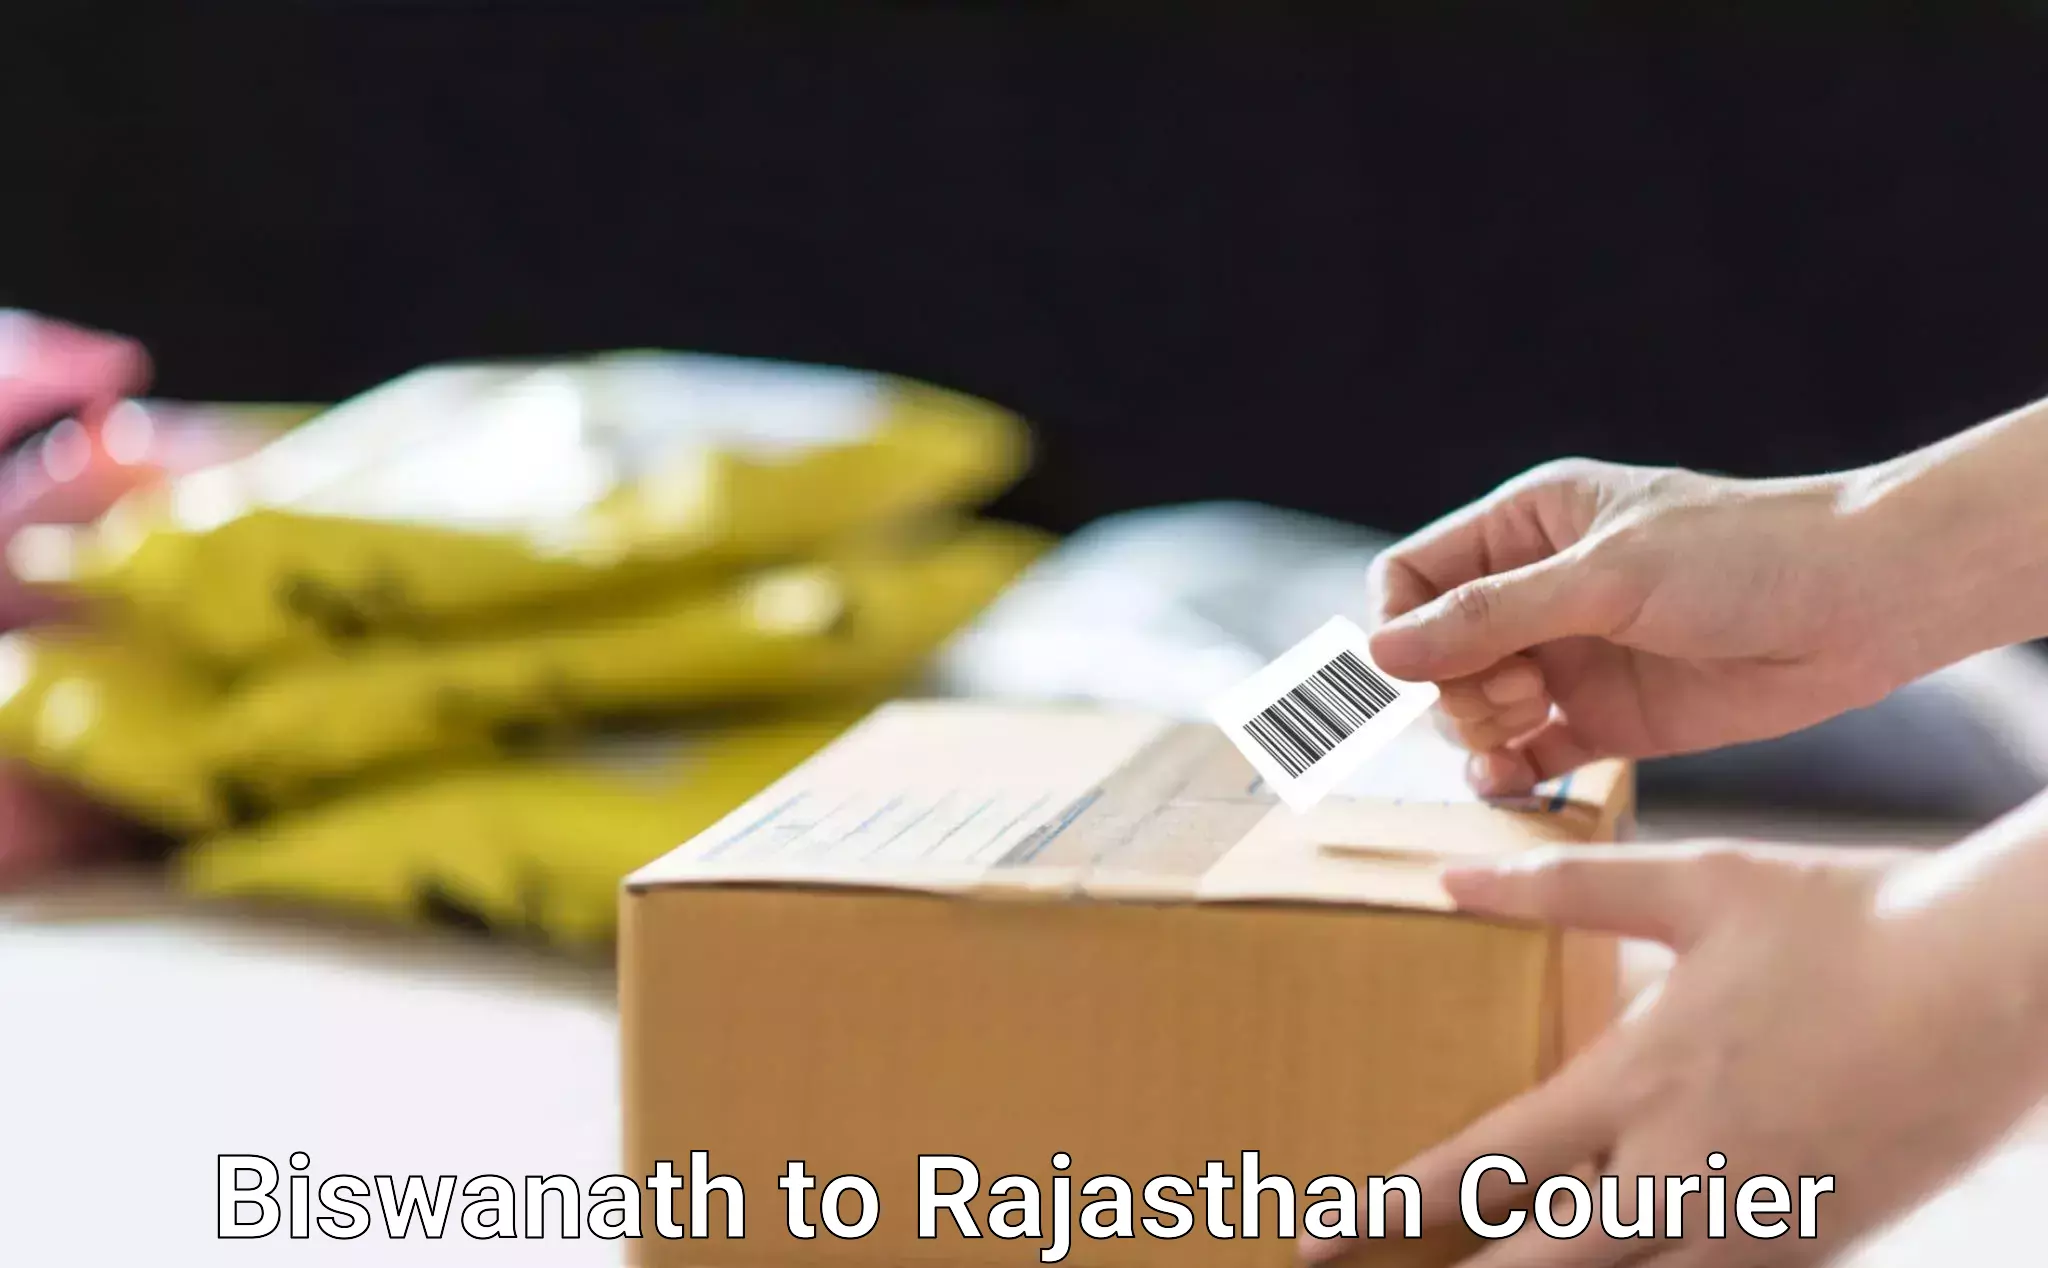 State-of-the-art courier technology Biswanath to Alwar